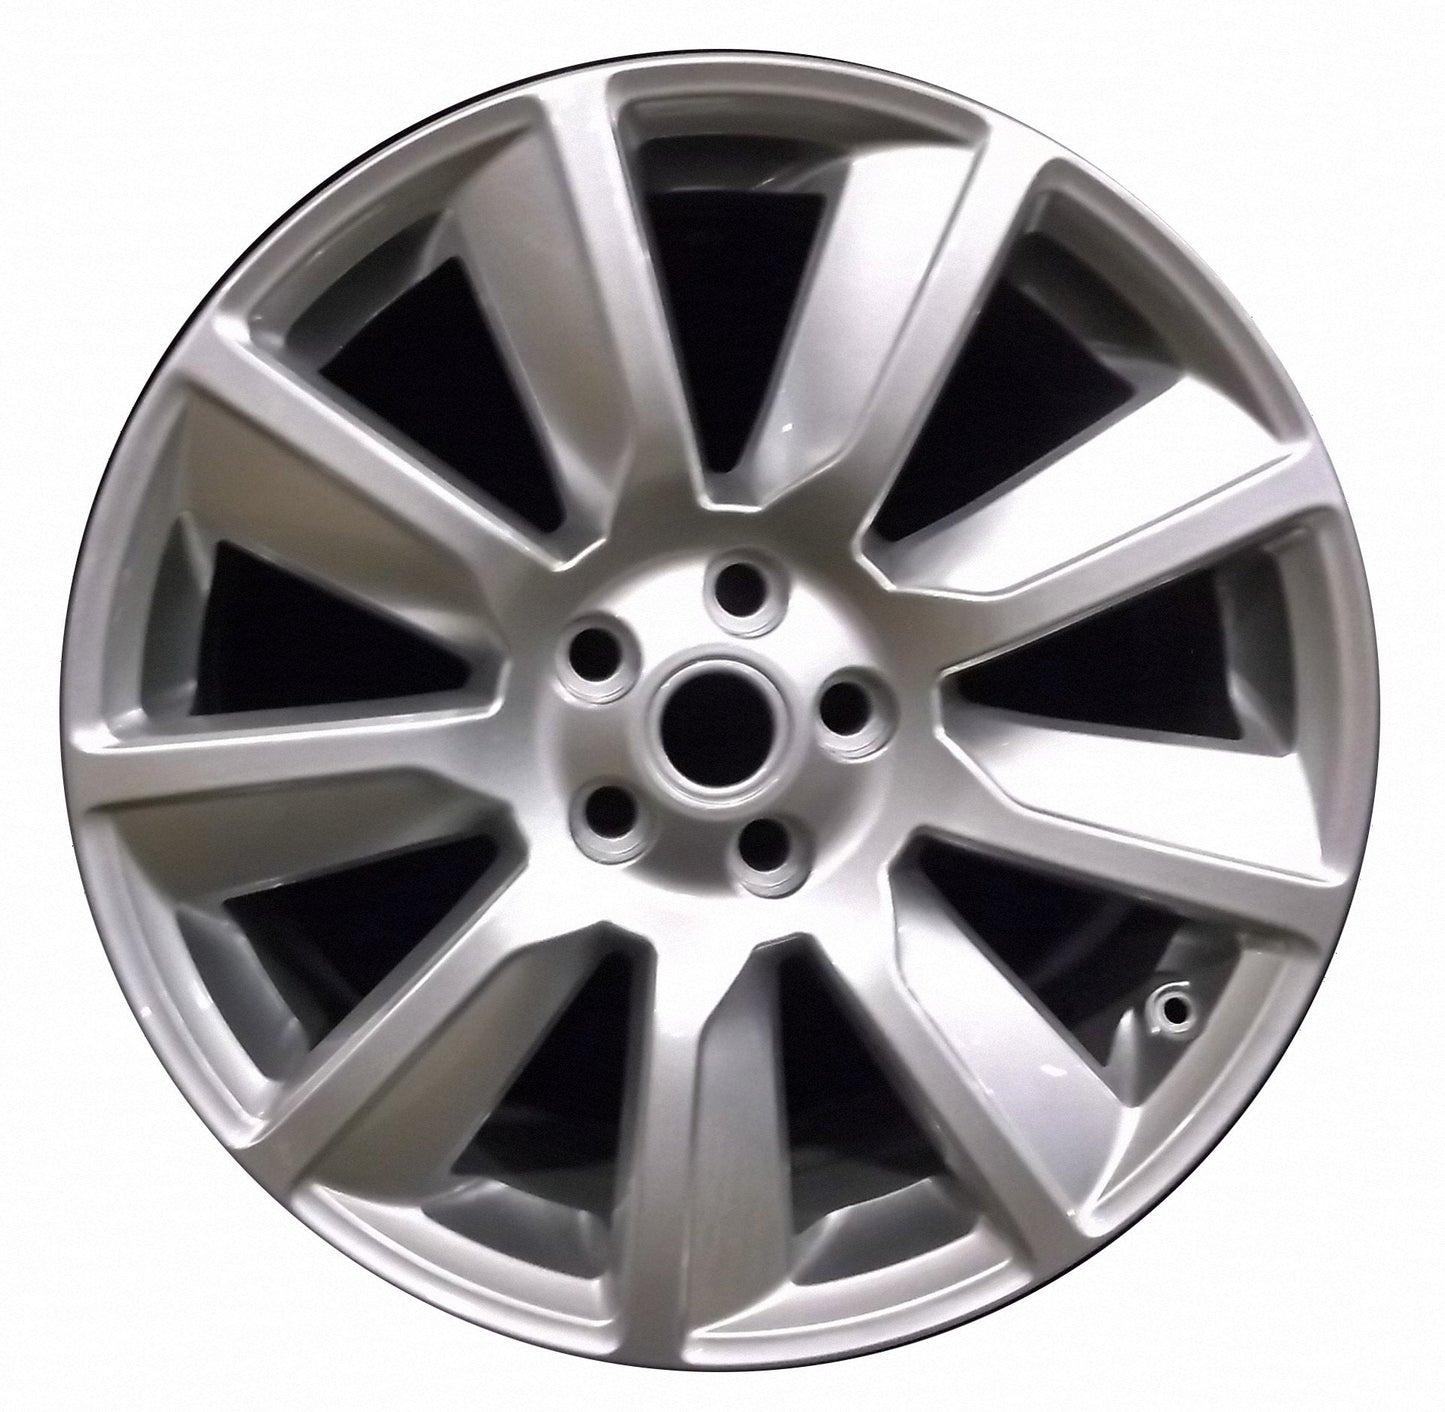 Land Rover Range Rover Sport  2012, 2013 Factory OEM Car Wheel Size 20x9.5 Alloy WAO.72238.PS08.FF